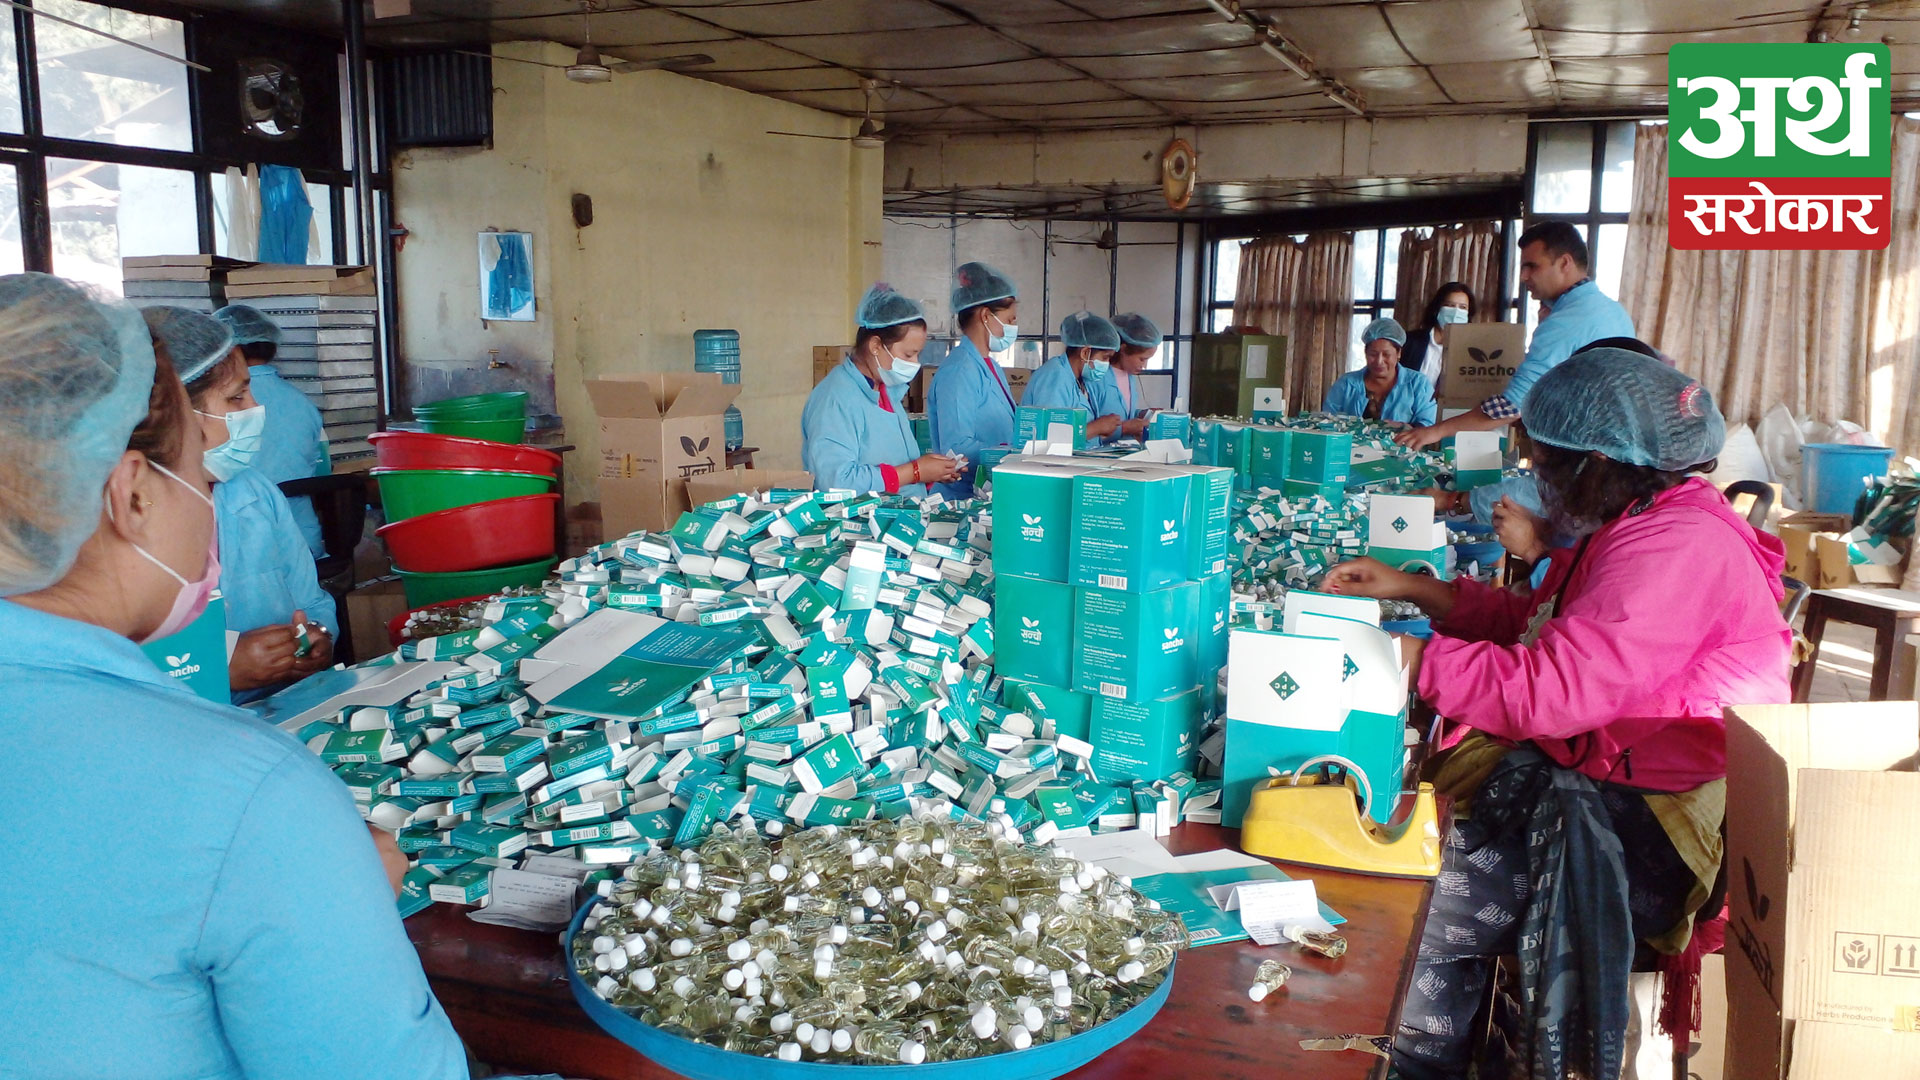 Herbs Production and Processing Company Ltd starts making profit after 40 years